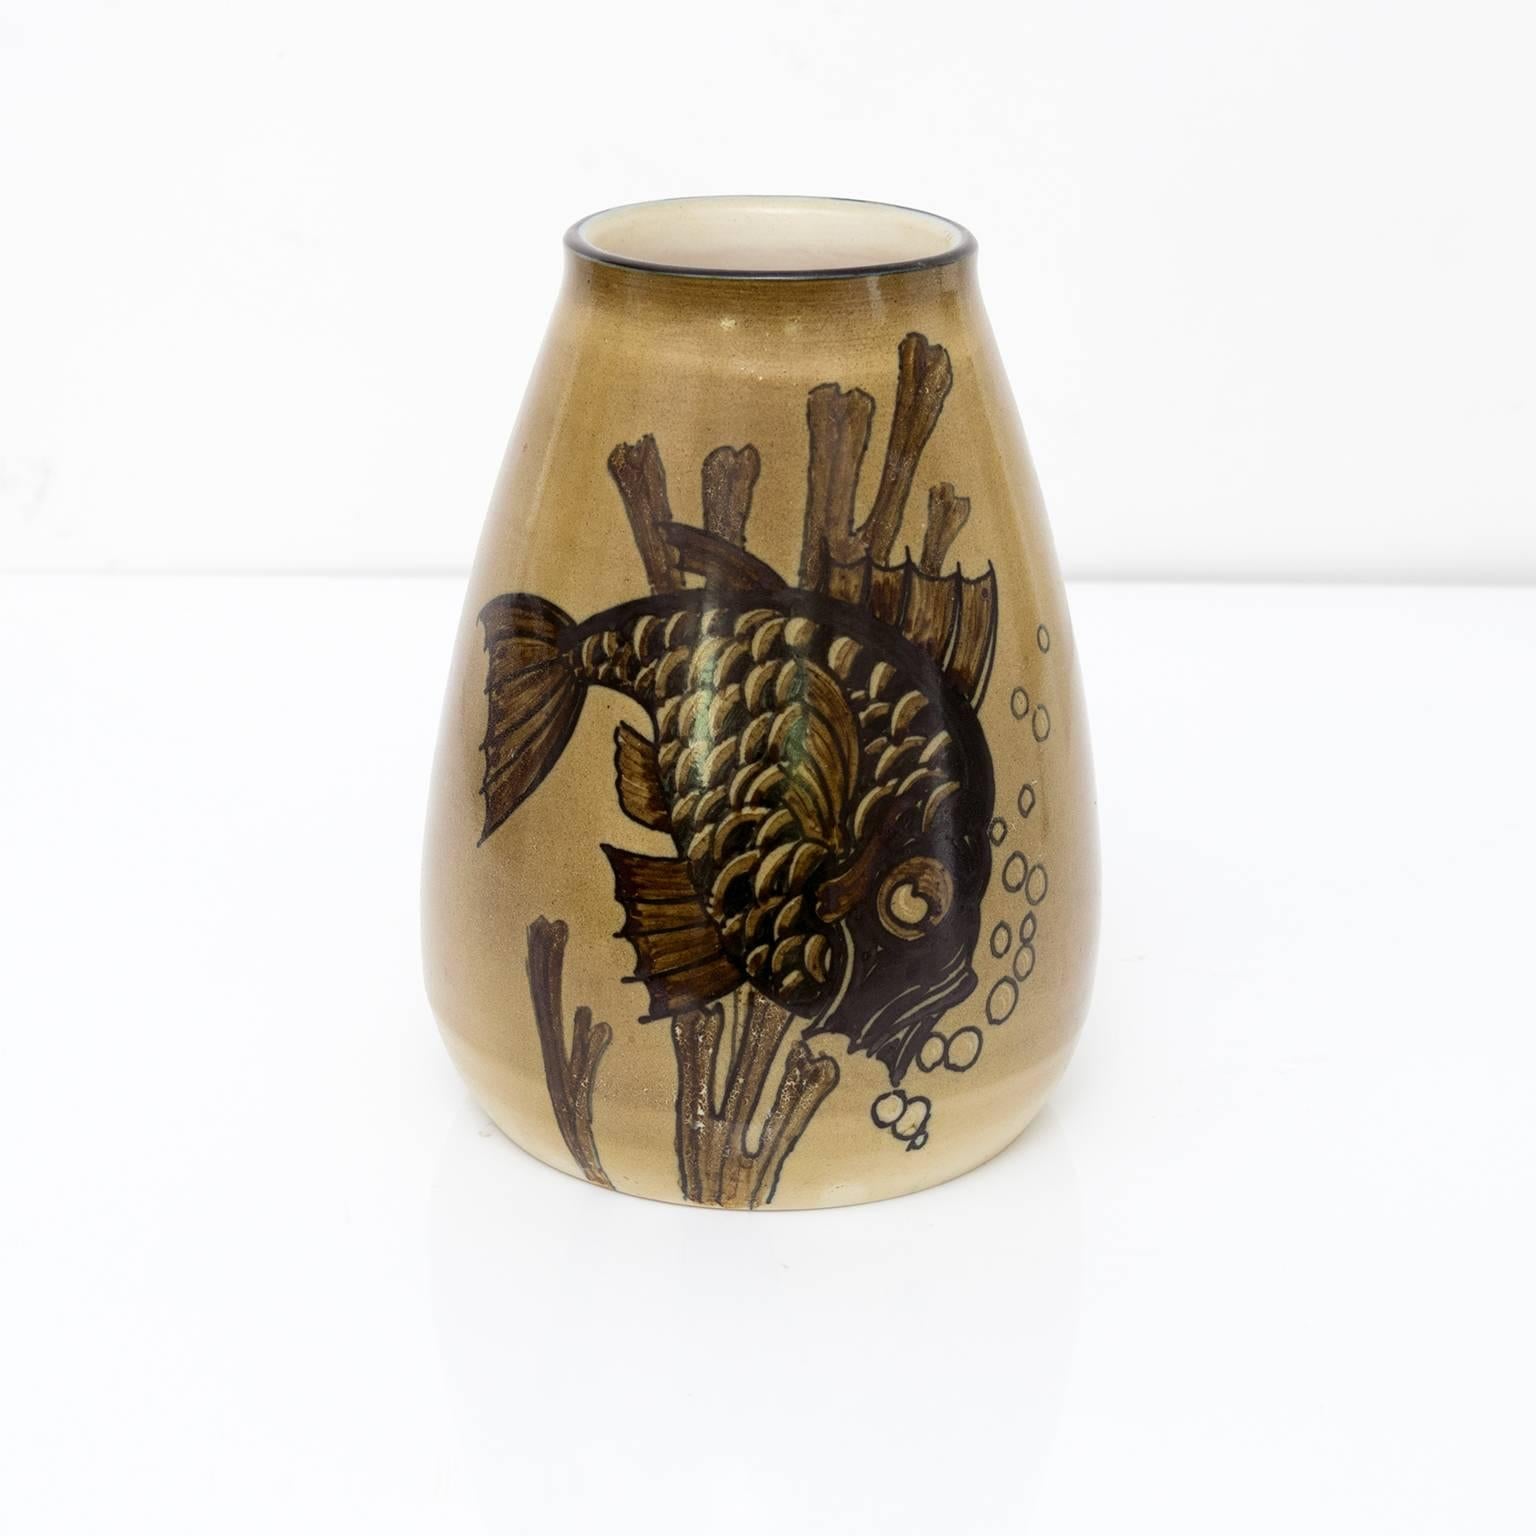 Unique hand decorated Swedish Art Deco vase by Josef Ekberg depicting a fish underwater. Made at Gustavsberg, circa 1930.
 
Measure: Height 7.75